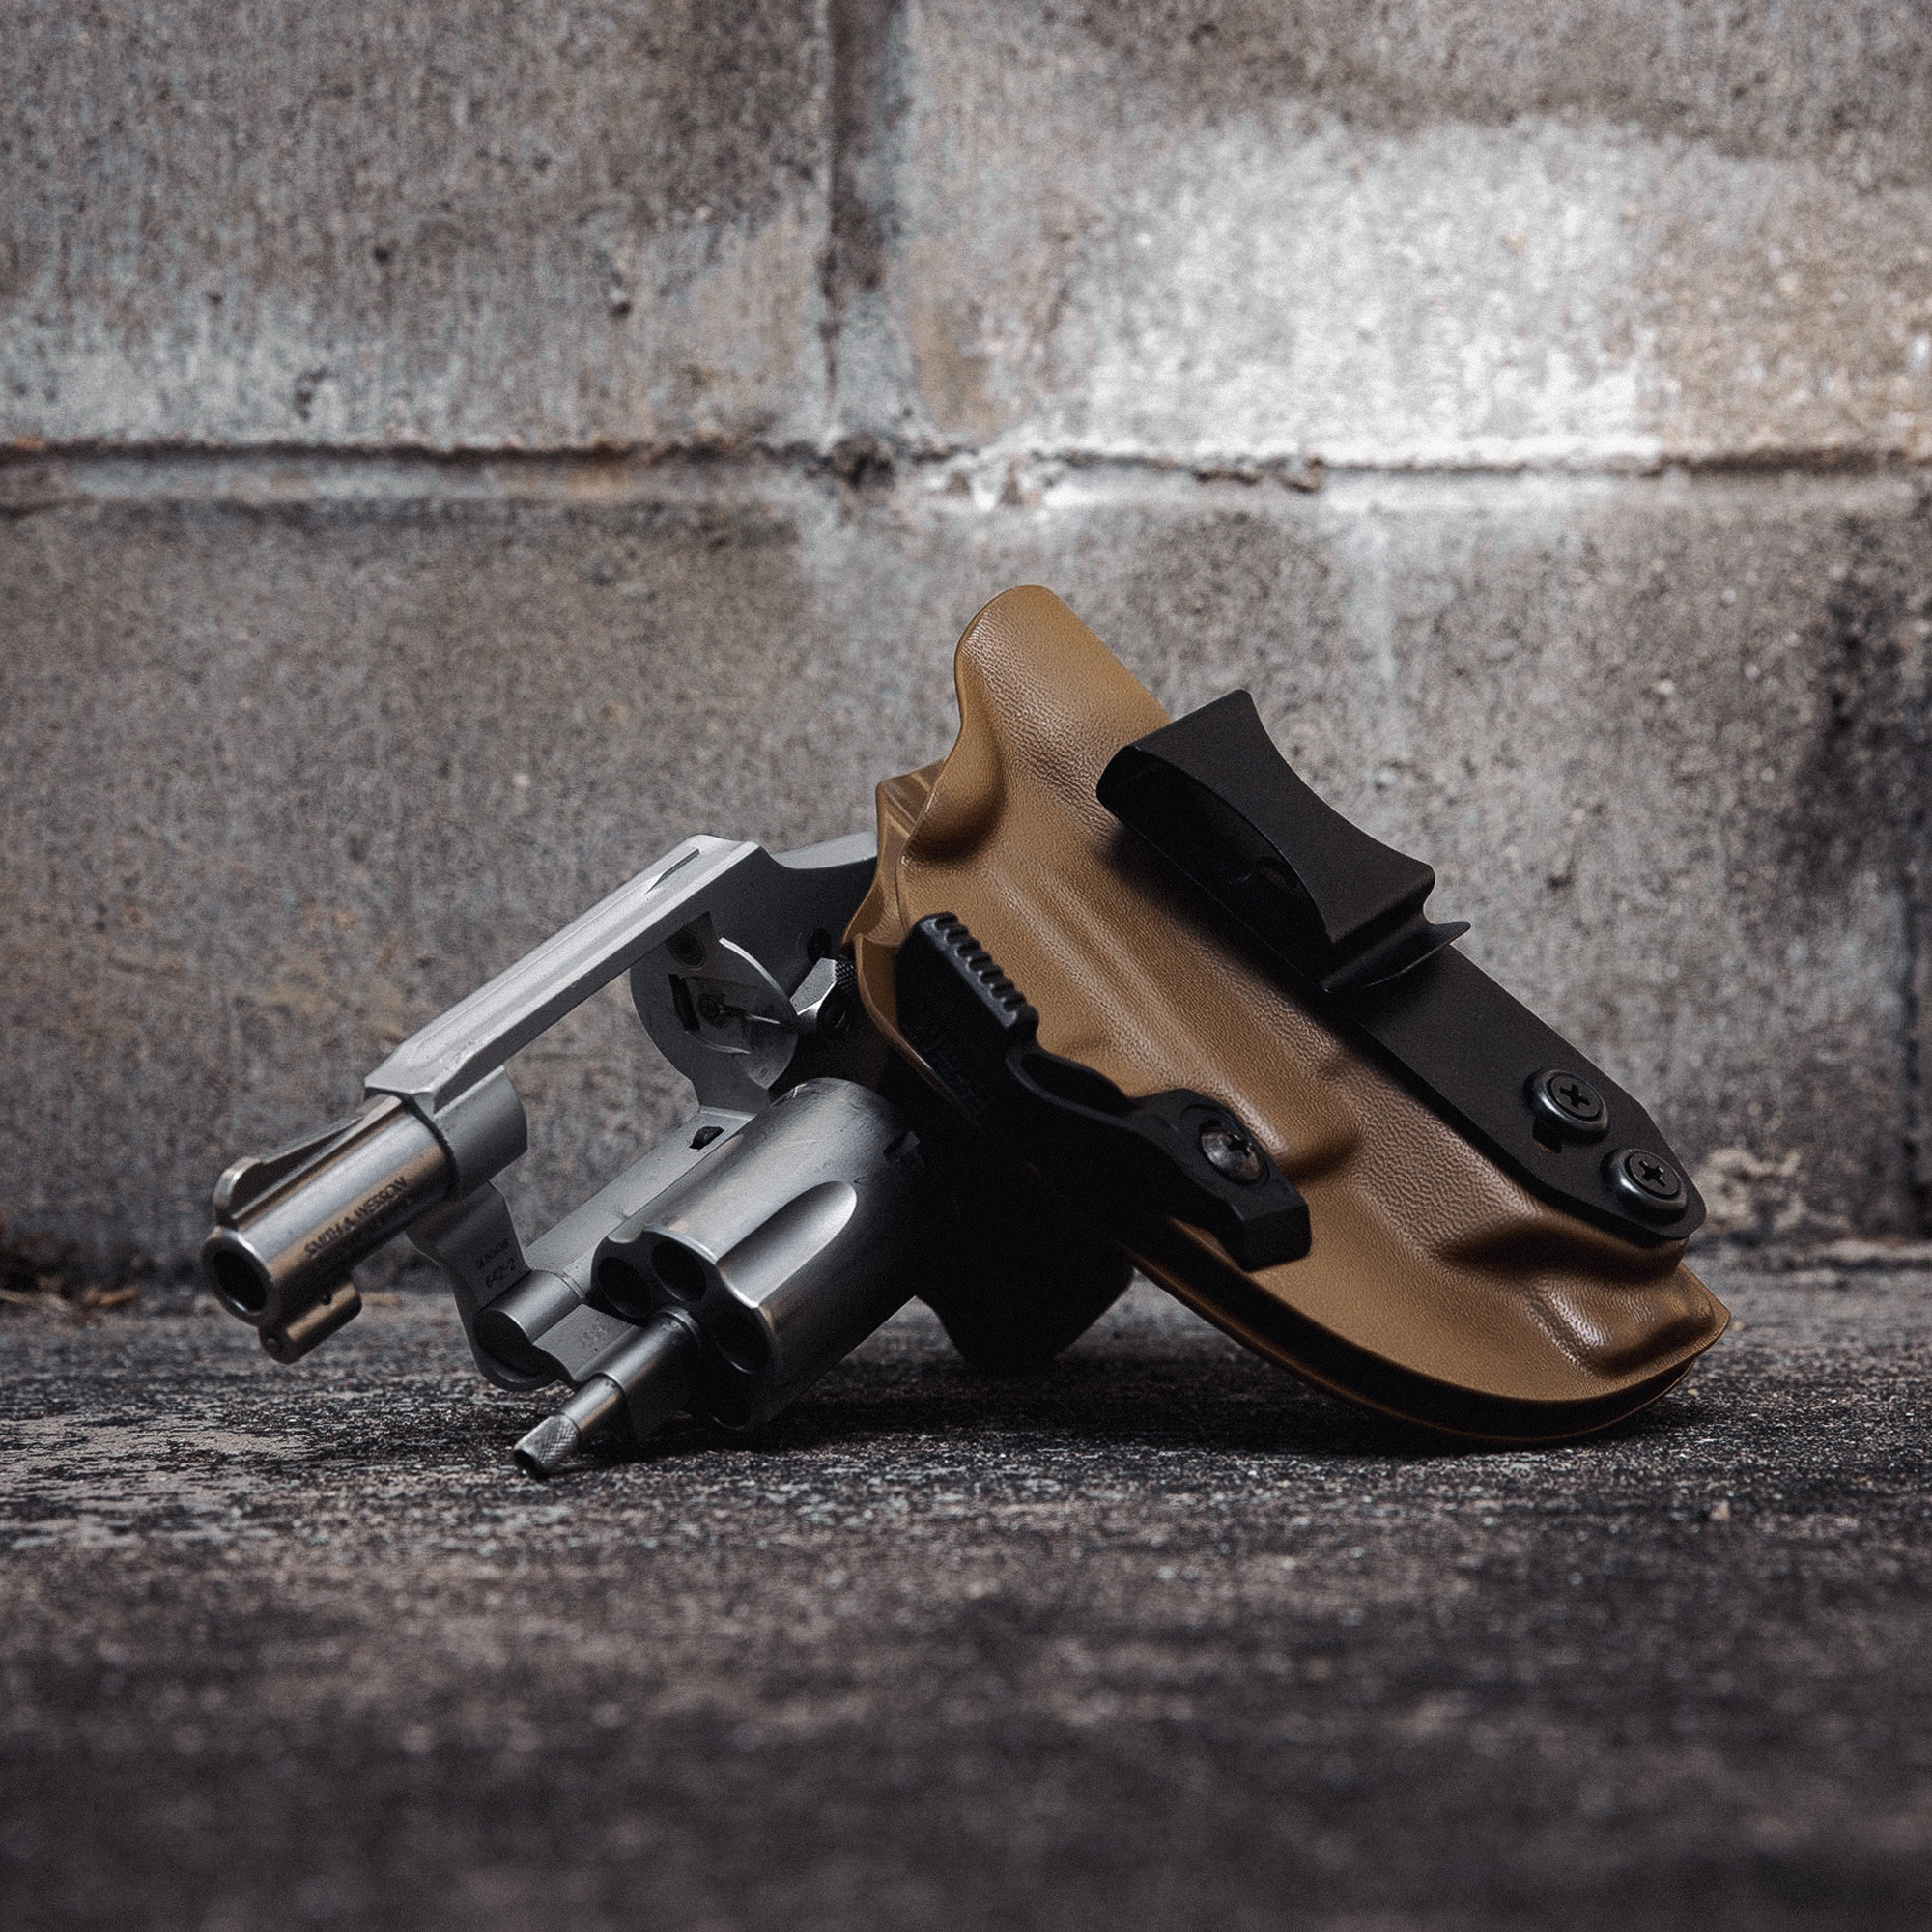 Can a revolver jam - generic image of a revolver and a Vedder Holsters